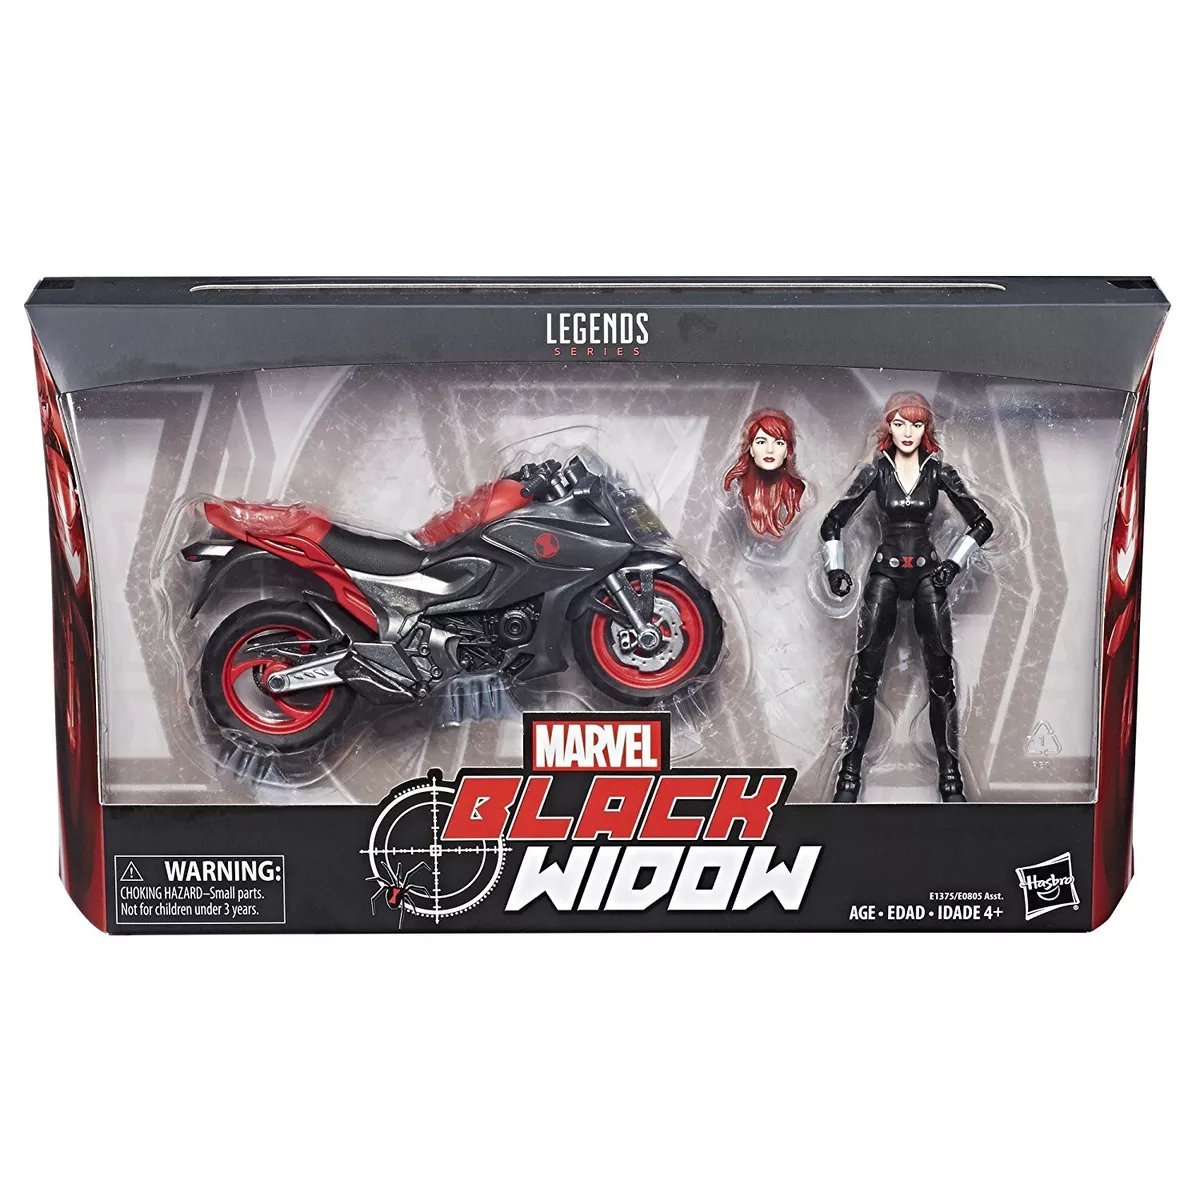 Hasbro Marvel Legends Black Widow & Motorcycle Set is down to $23.81 on Amazon - amzn.to/4dEHmHS #ad